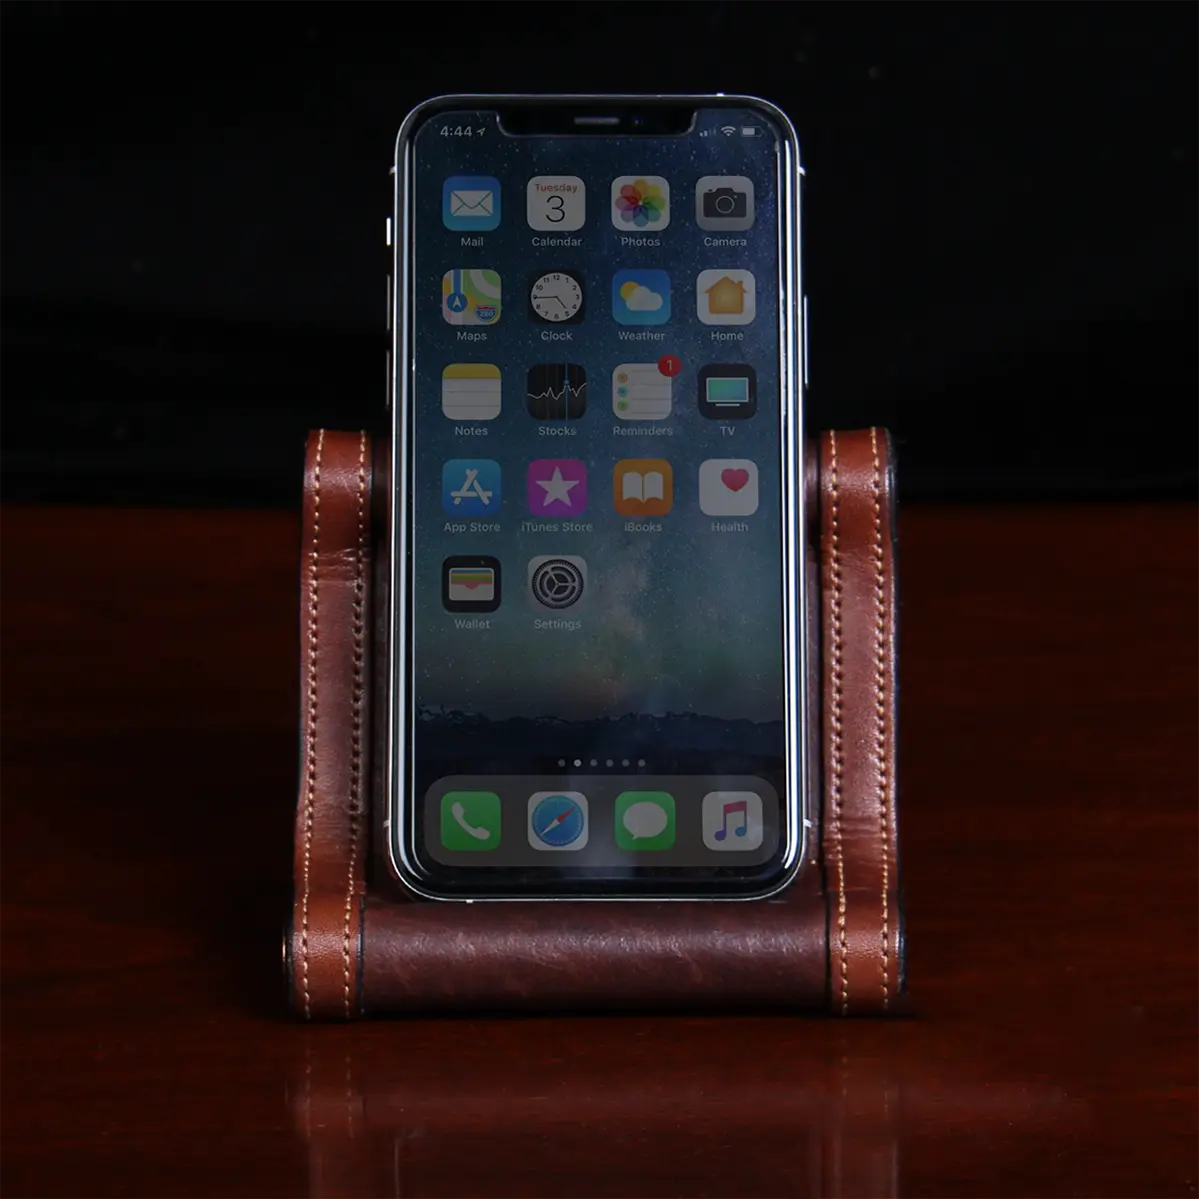 Phone Holder with phone on desk